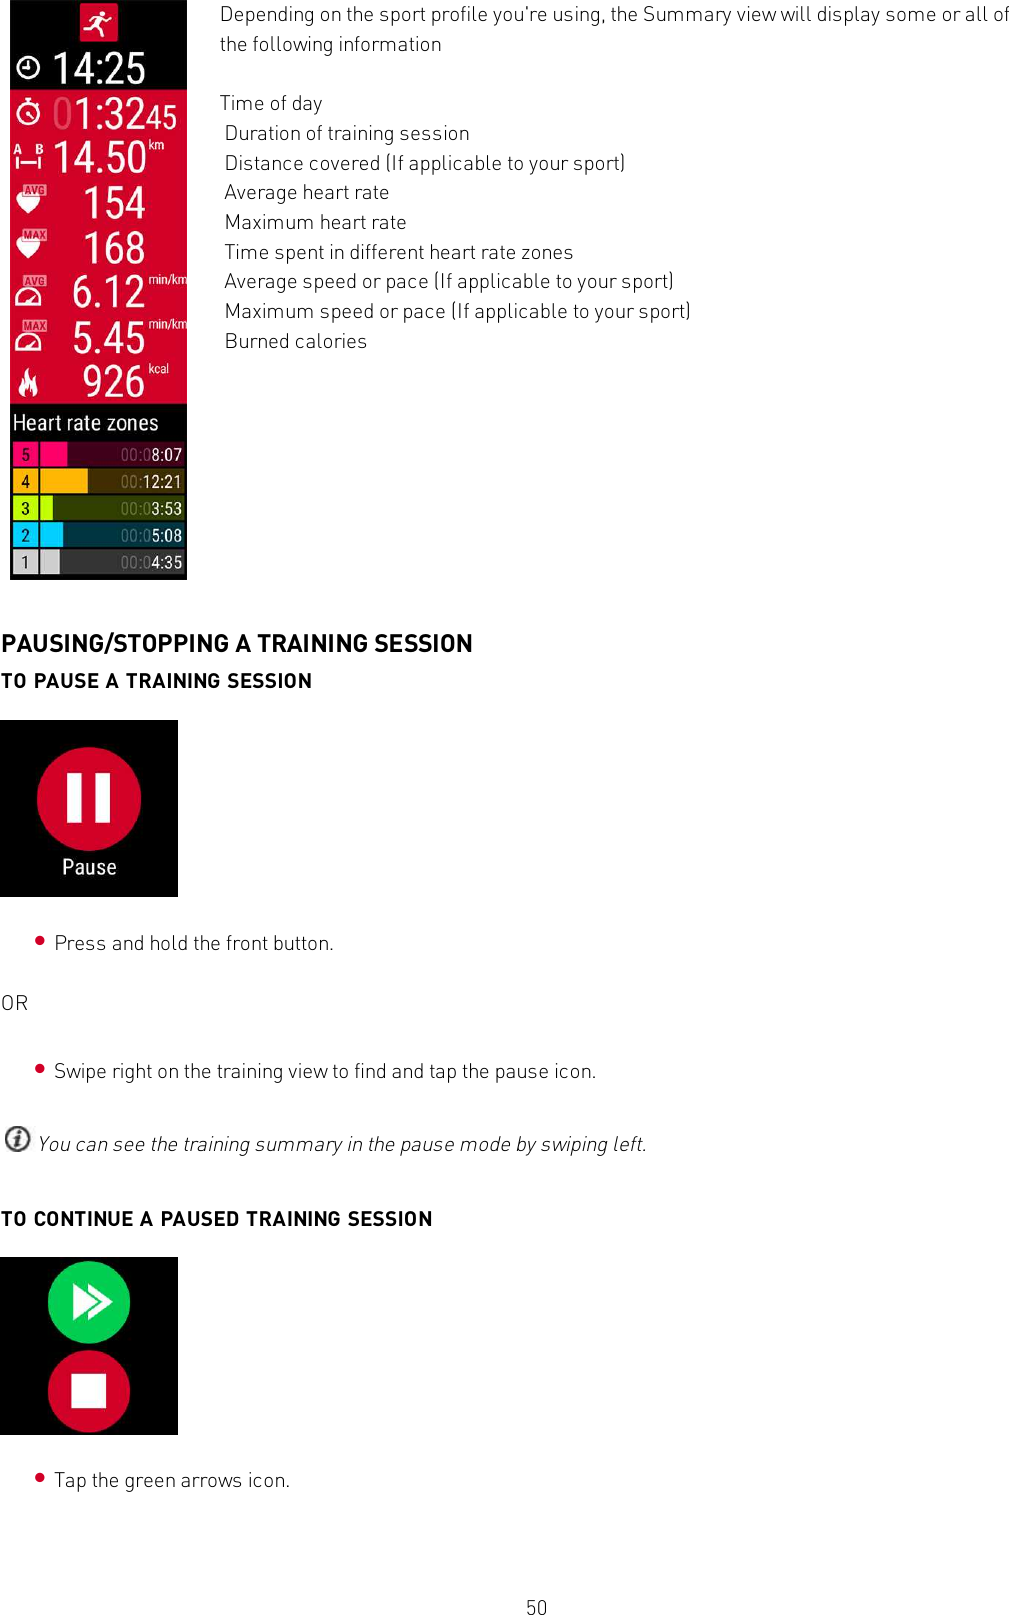 50Depending on the sport profile you&apos;re using, the Summary view will display some or all ofthe following informationTime of dayDuration of training sessionDistance covered (If applicable to your sport)Average heart rateMaximum heart rateTime spent in different heart rate zonesAverage speed or pace (If applicable to your sport)Maximum speed or pace (If applicable to your sport)Burned caloriesPAUSING/STOPPING A TRAINING SESSIONTO PAUSE A TRAINING SESSION•Press and hold the front button.OR•Swipe right on the training view to find and tap the pause icon.You can see the training summary in the pause mode by swiping left.TO CONTINUE A PAUSED TRAINING SESSION•Tap the green arrows icon.